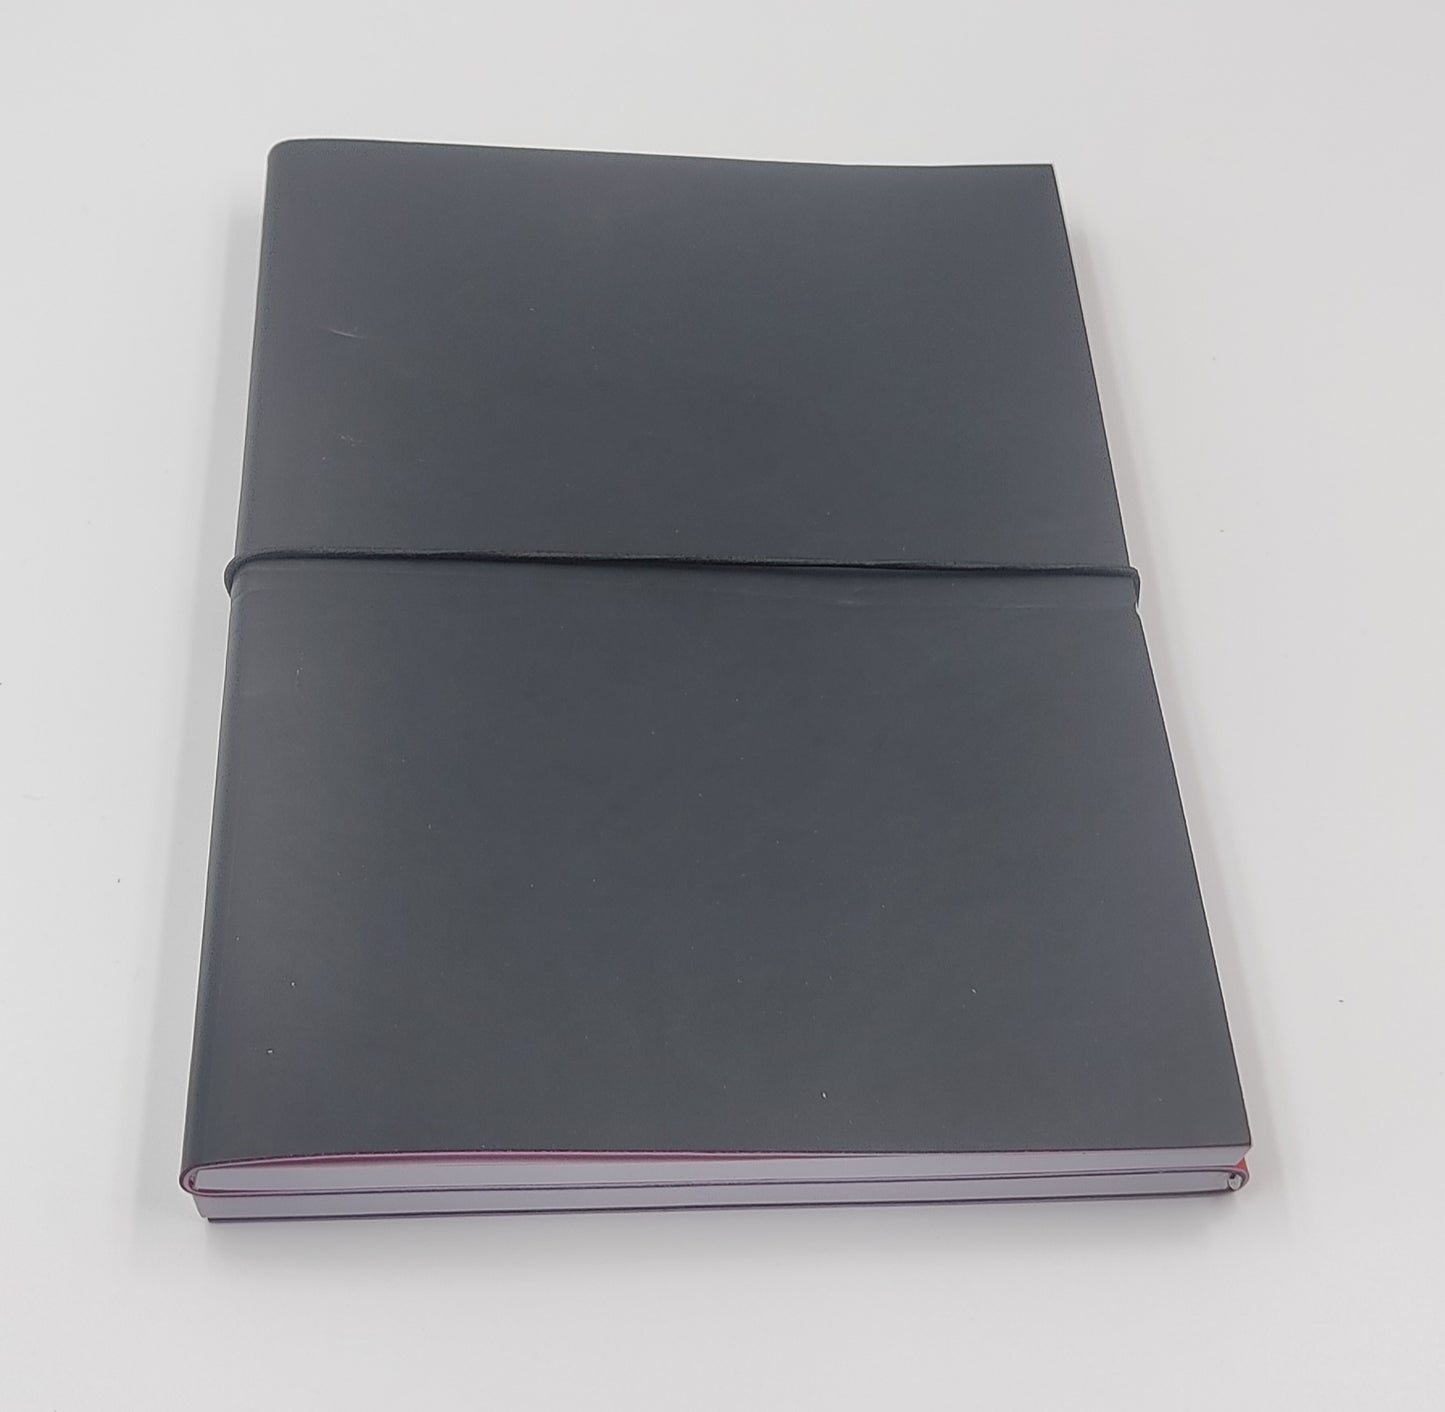 Double side folding notebook with Elastic Fastener | Tear off Pages | 240 writing pages